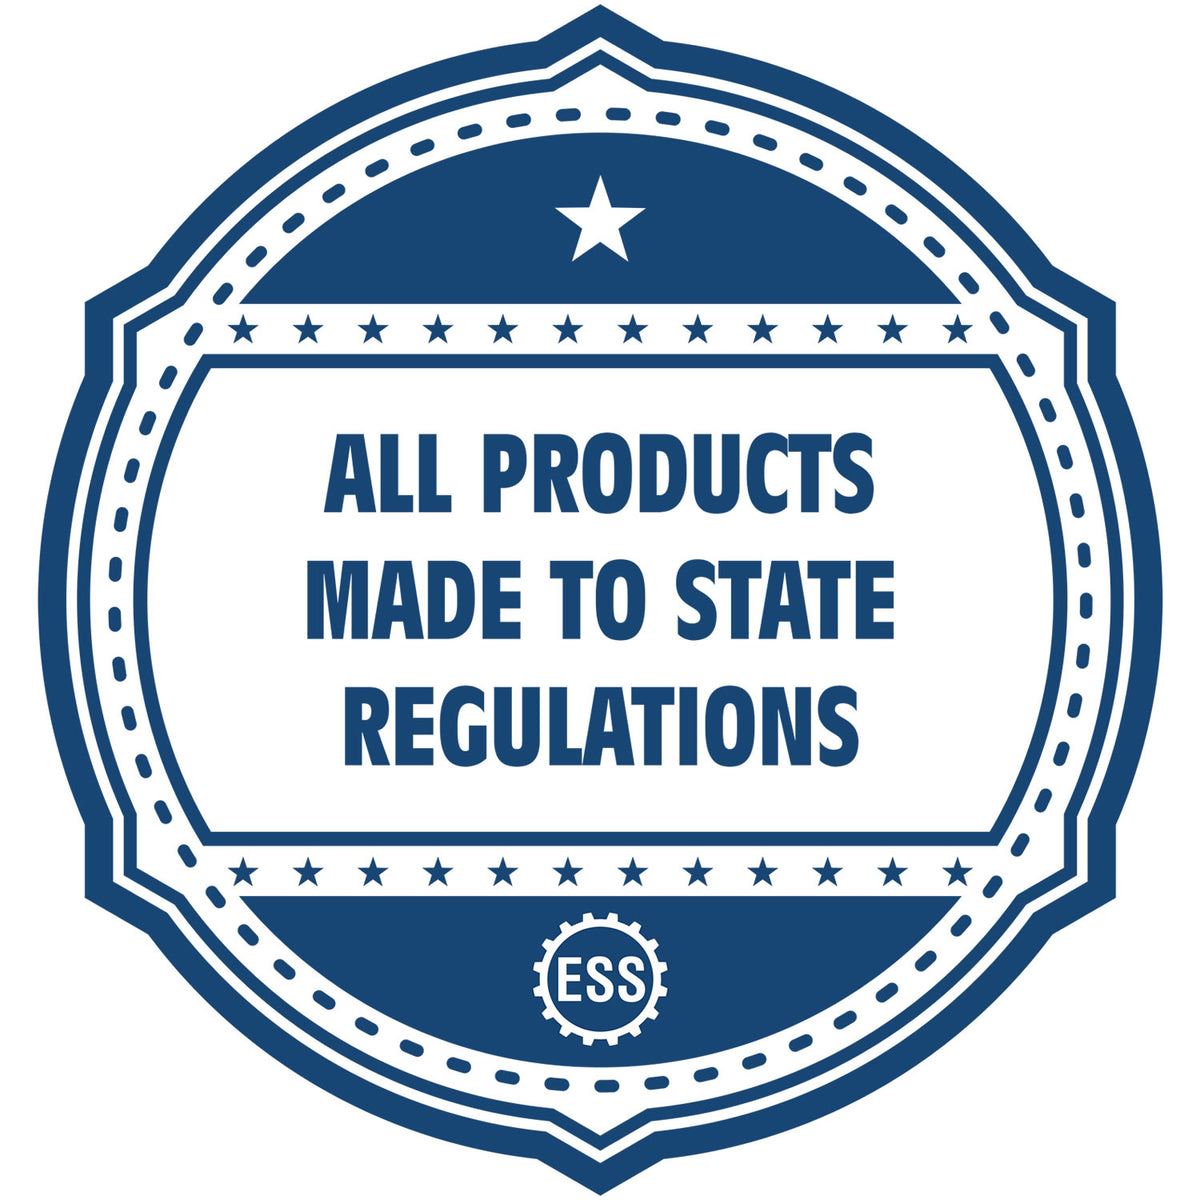 A blue icon or badge for the Hybrid Tennessee Architect Seal showing that this product is made in compliance with state regulations.